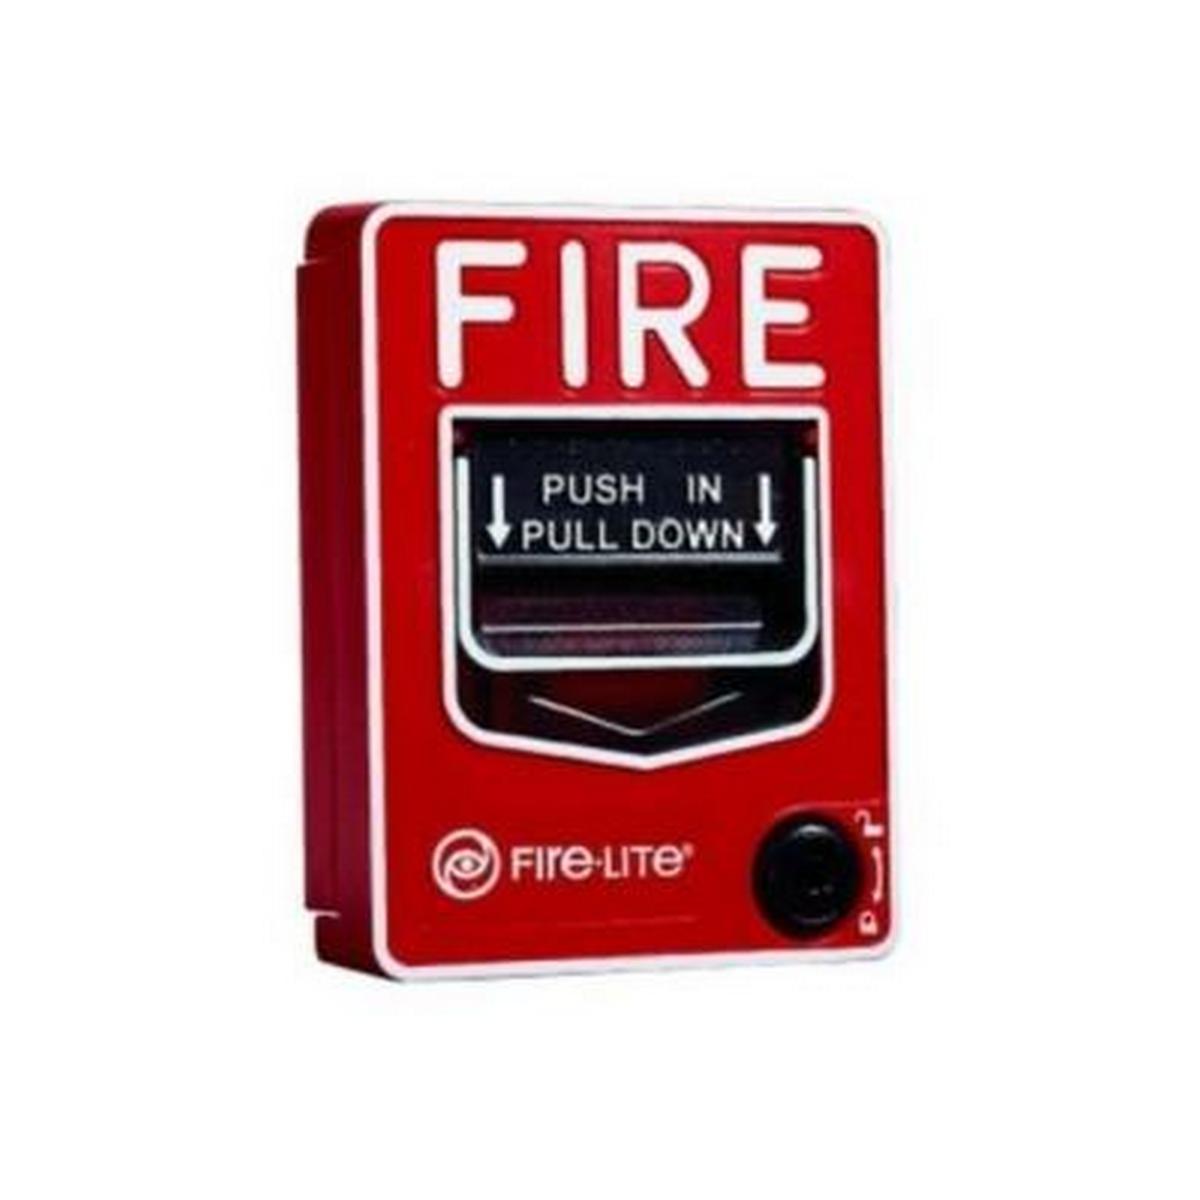 Fire-Lite BG-12  DUAL ACTION LEXAN
PULL STATION (RED) SCREW TERMINAL
LEADS HEX KEY